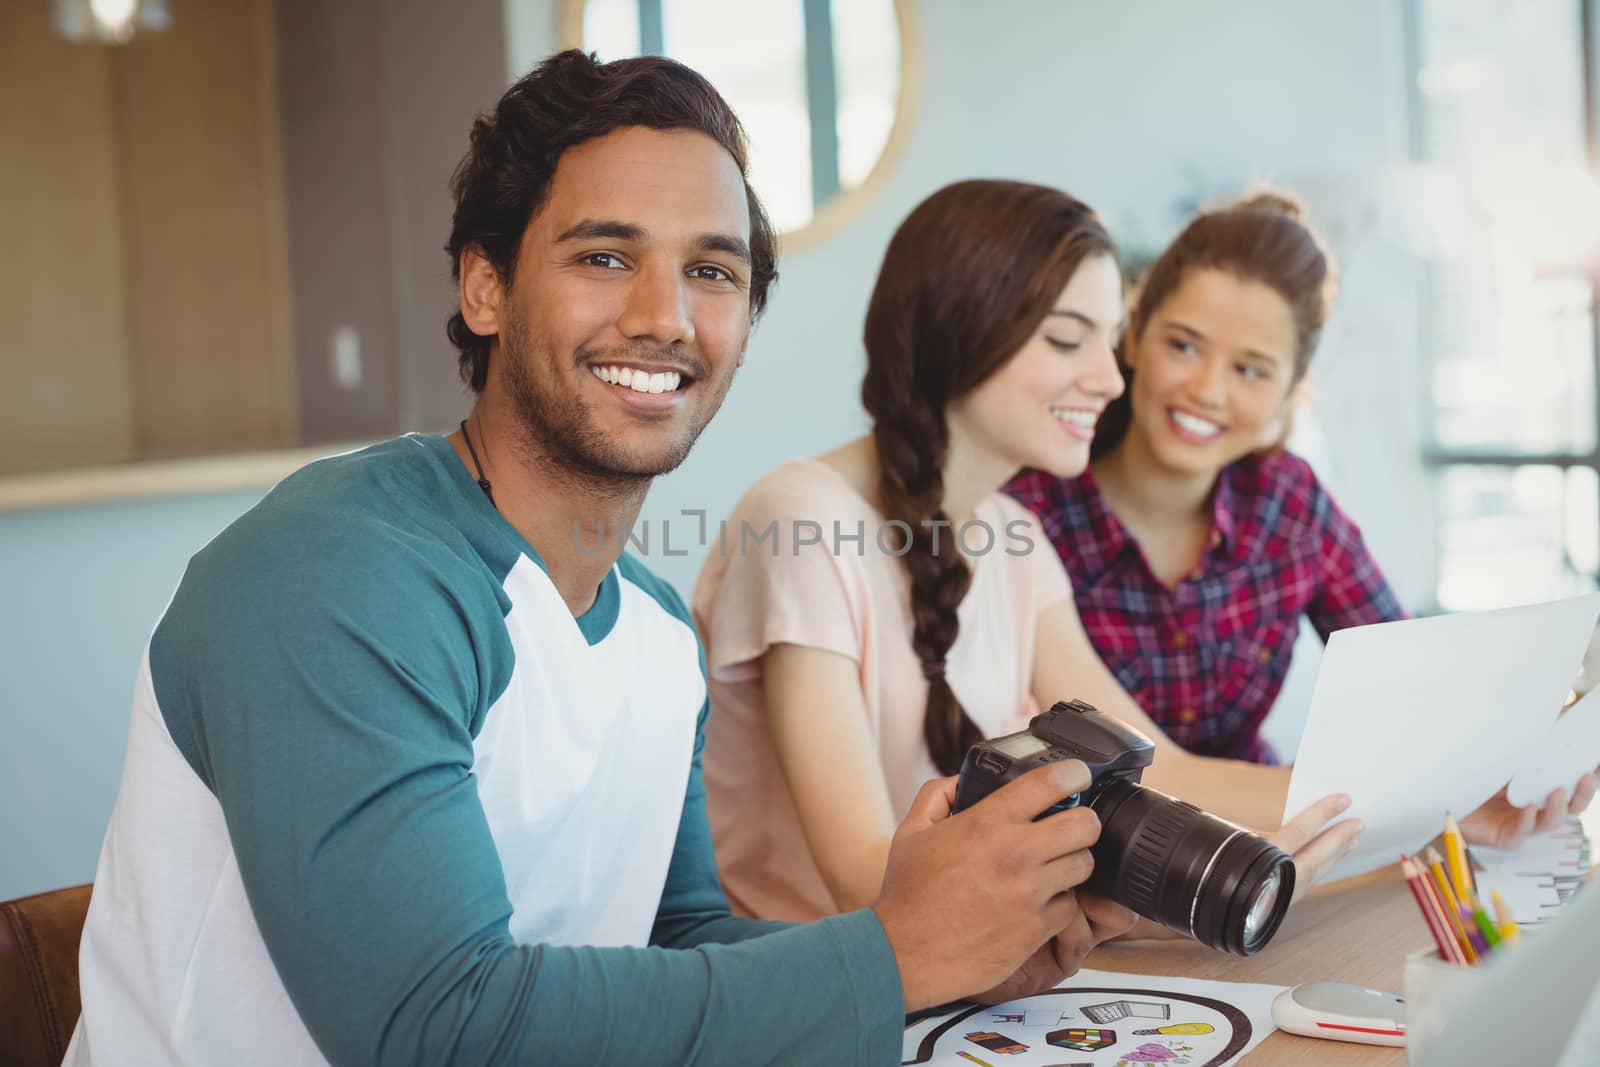 Portrait of fashion designer holding digital camera with colleagues in background in office